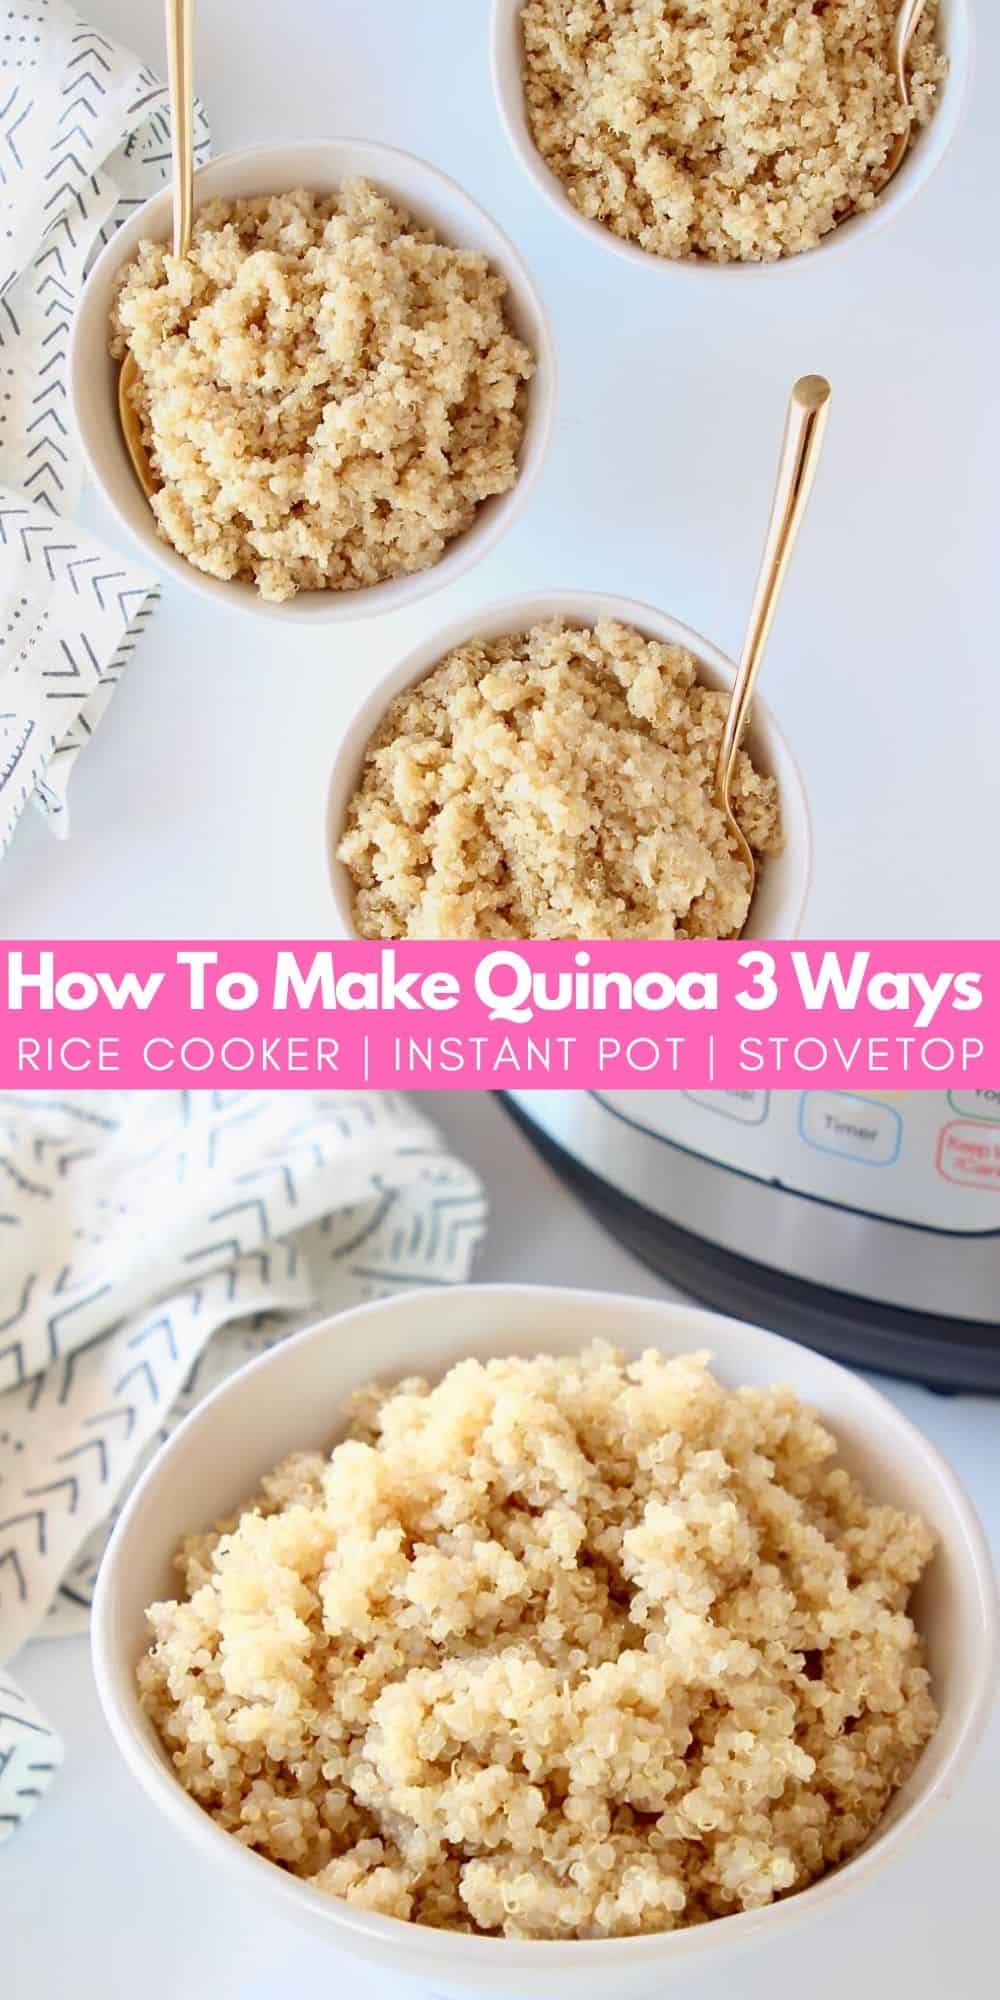 How to Cook Quinoa 3 Ways - Bowls Are The New Plates